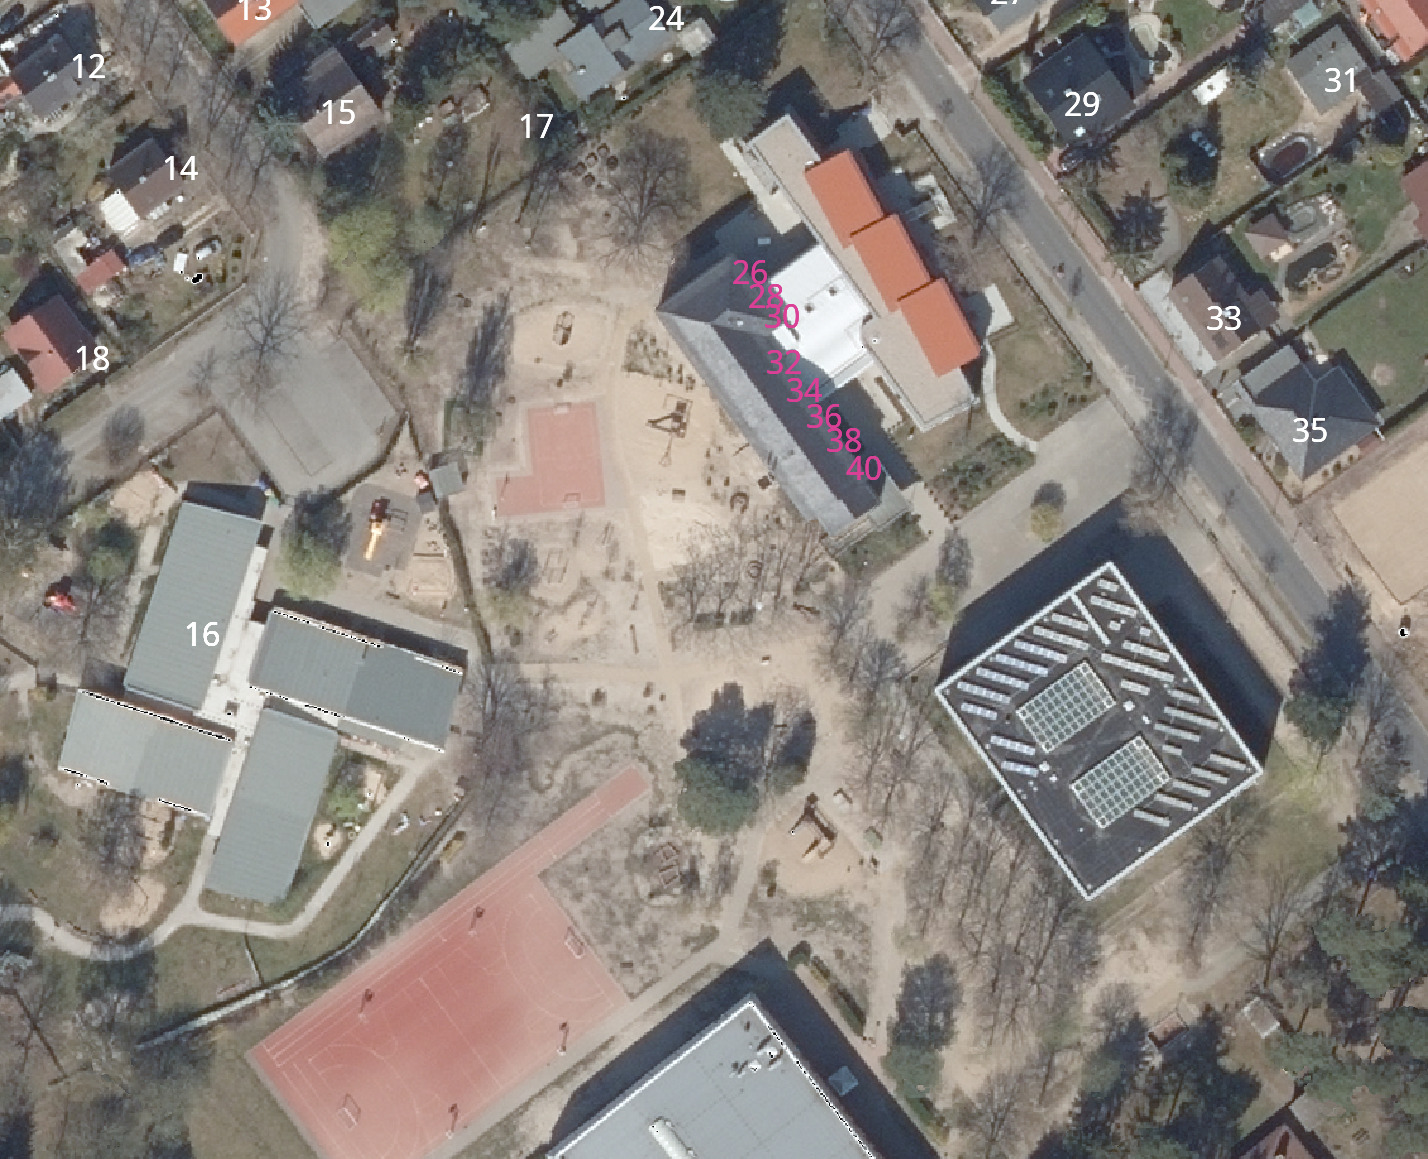 Aerial view of a school campus with several house numbers